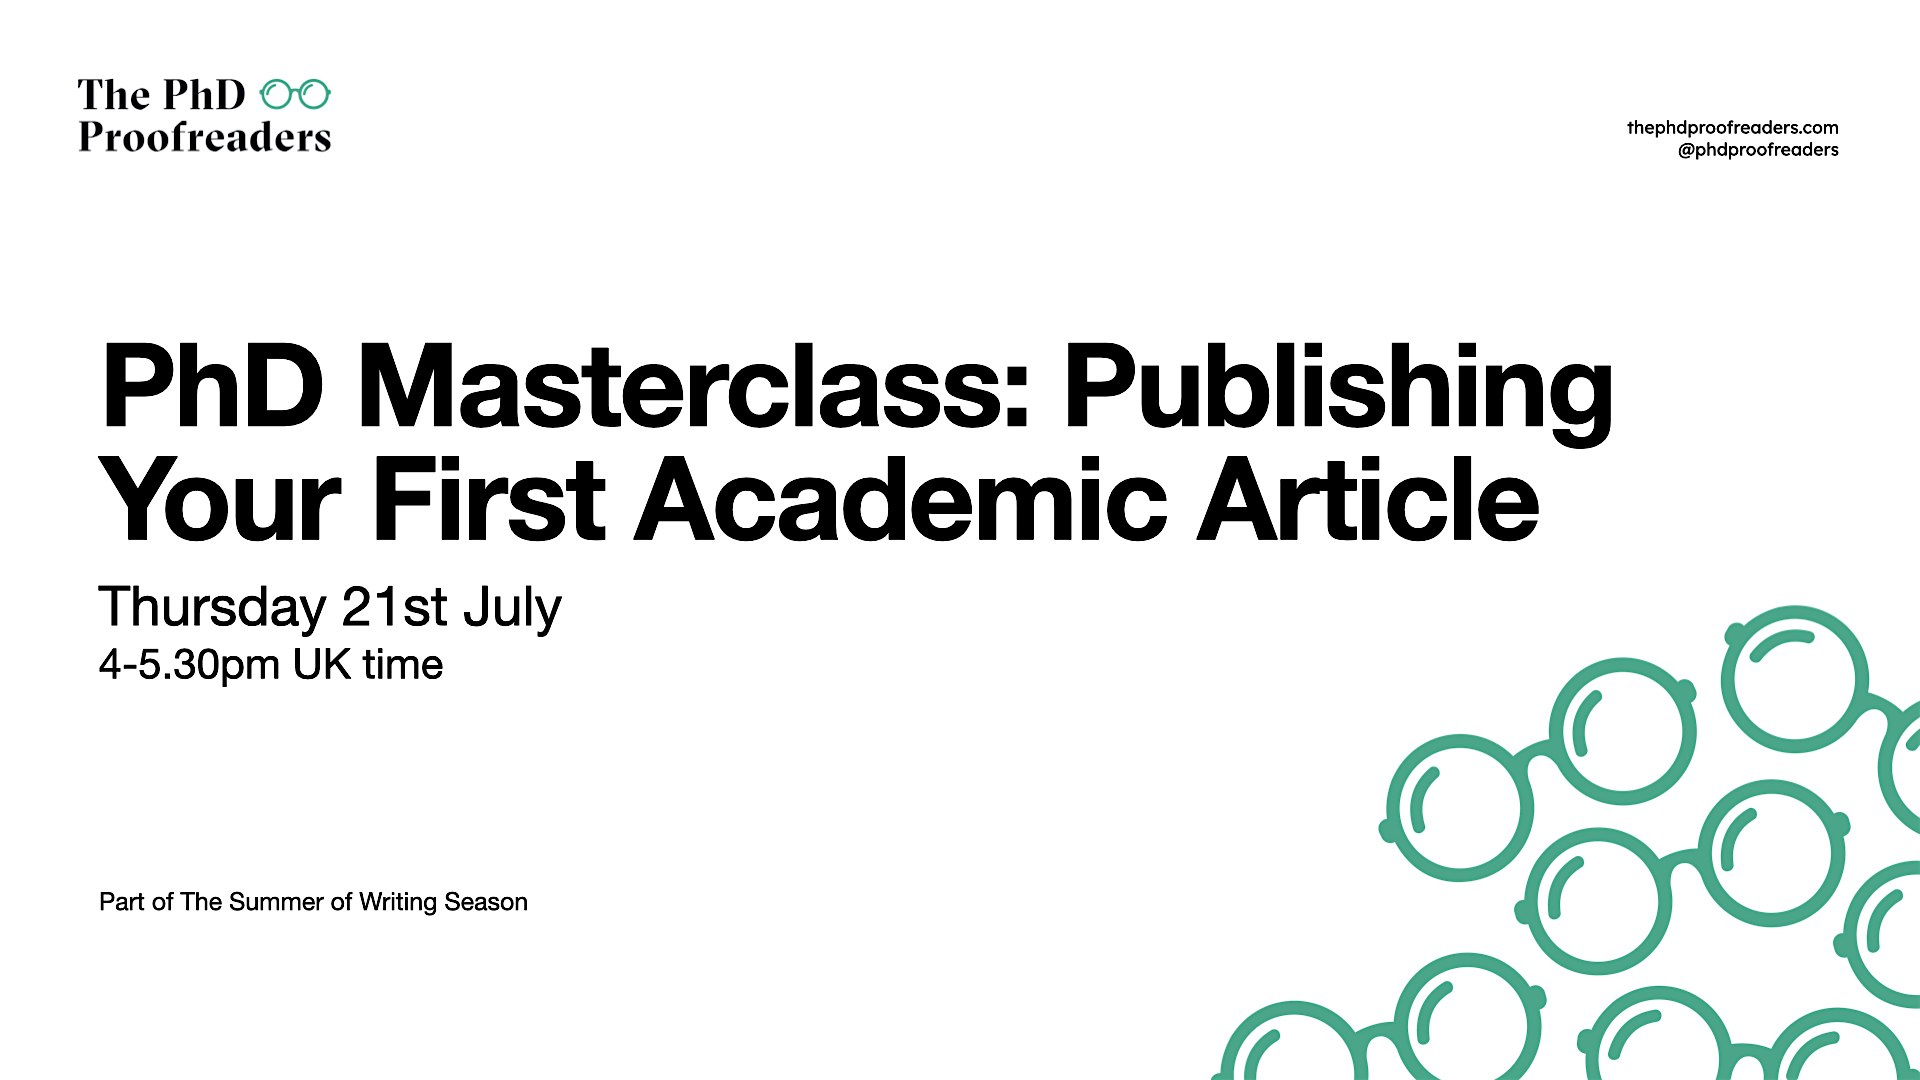 PhD Masterclass: Publishing Your First Academic Article